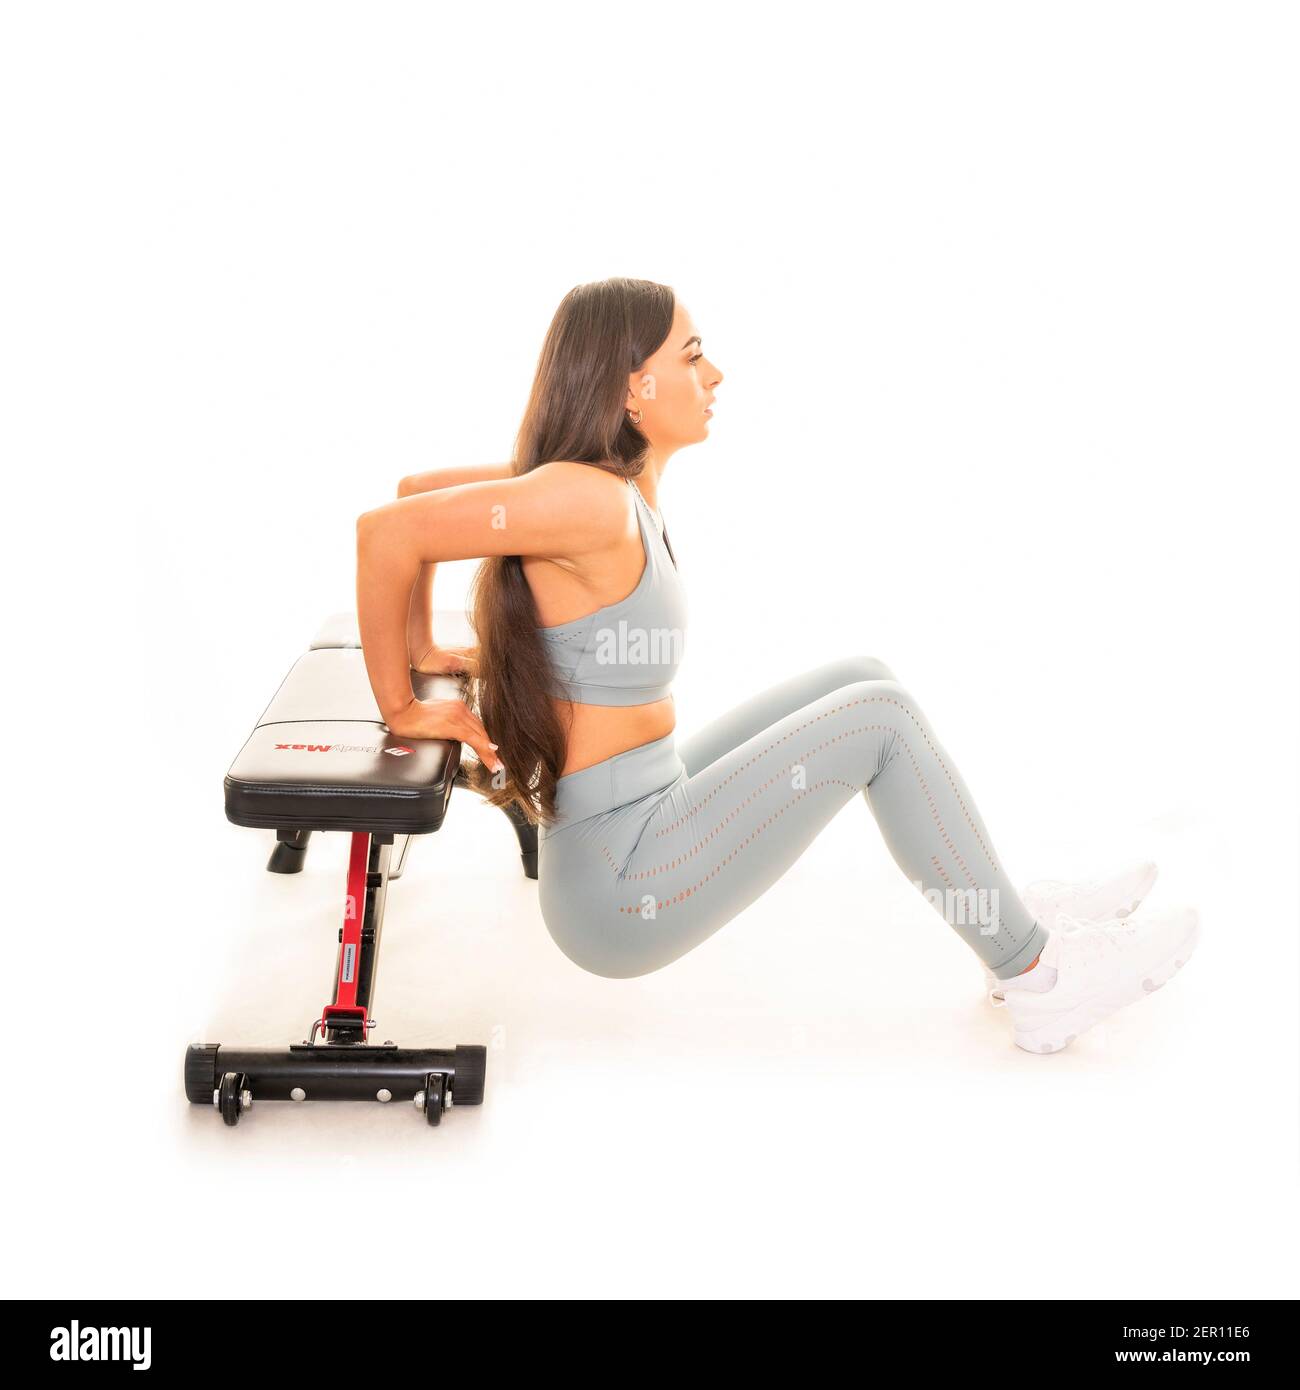 Square portrait of a young woman doing a tricep dip using a gym bench, isolated on a white background. Stock Photo